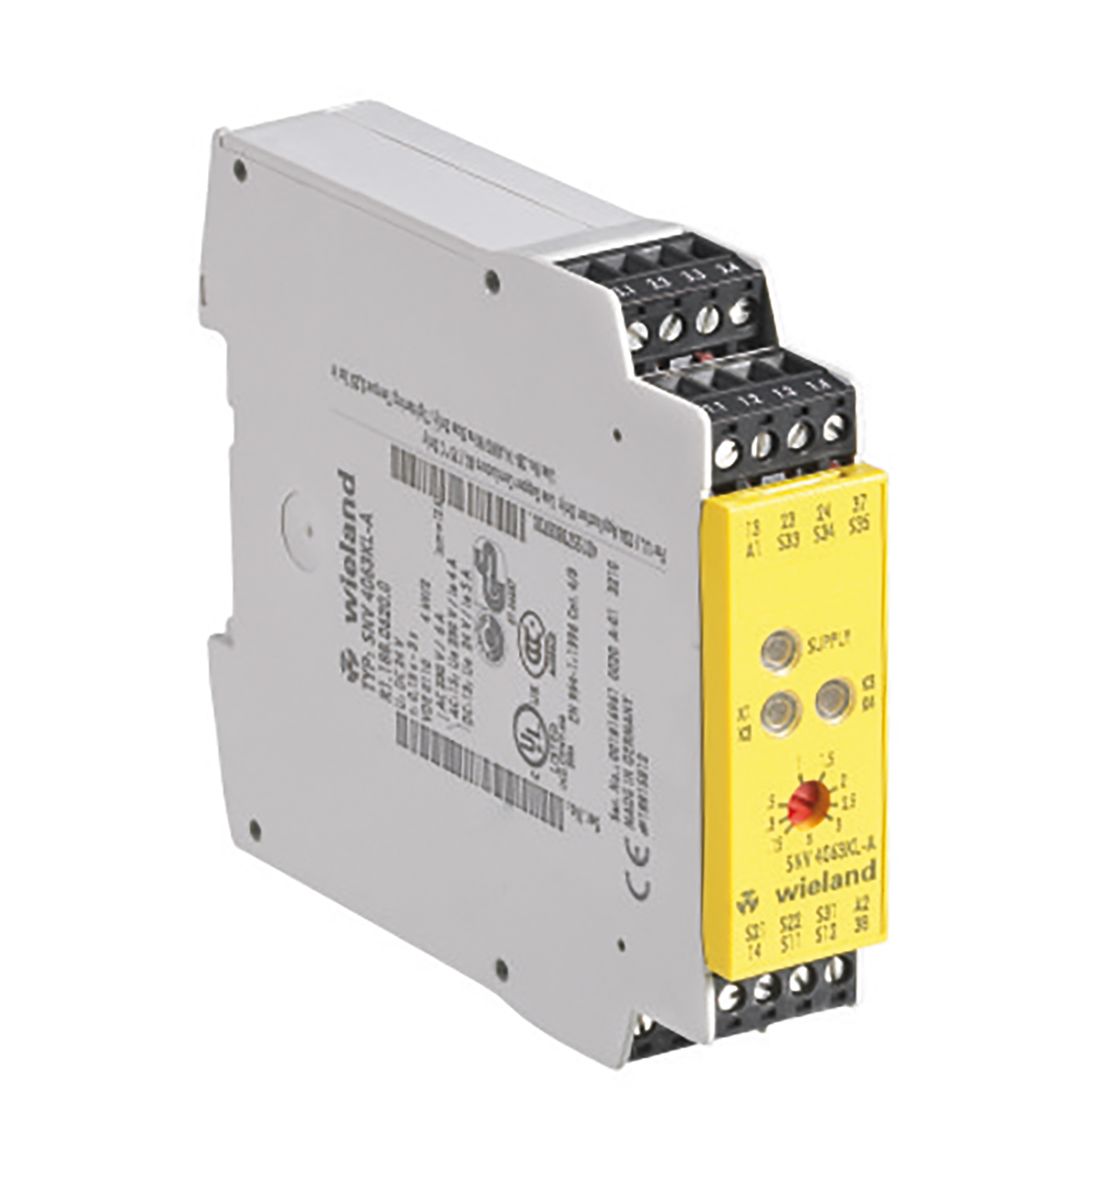 Wieland SNV 4063KL Series Dual-Channel Emergency Stop, Light Beam/Curtain, Safety Switch/Interlock Safety Relay, 24V